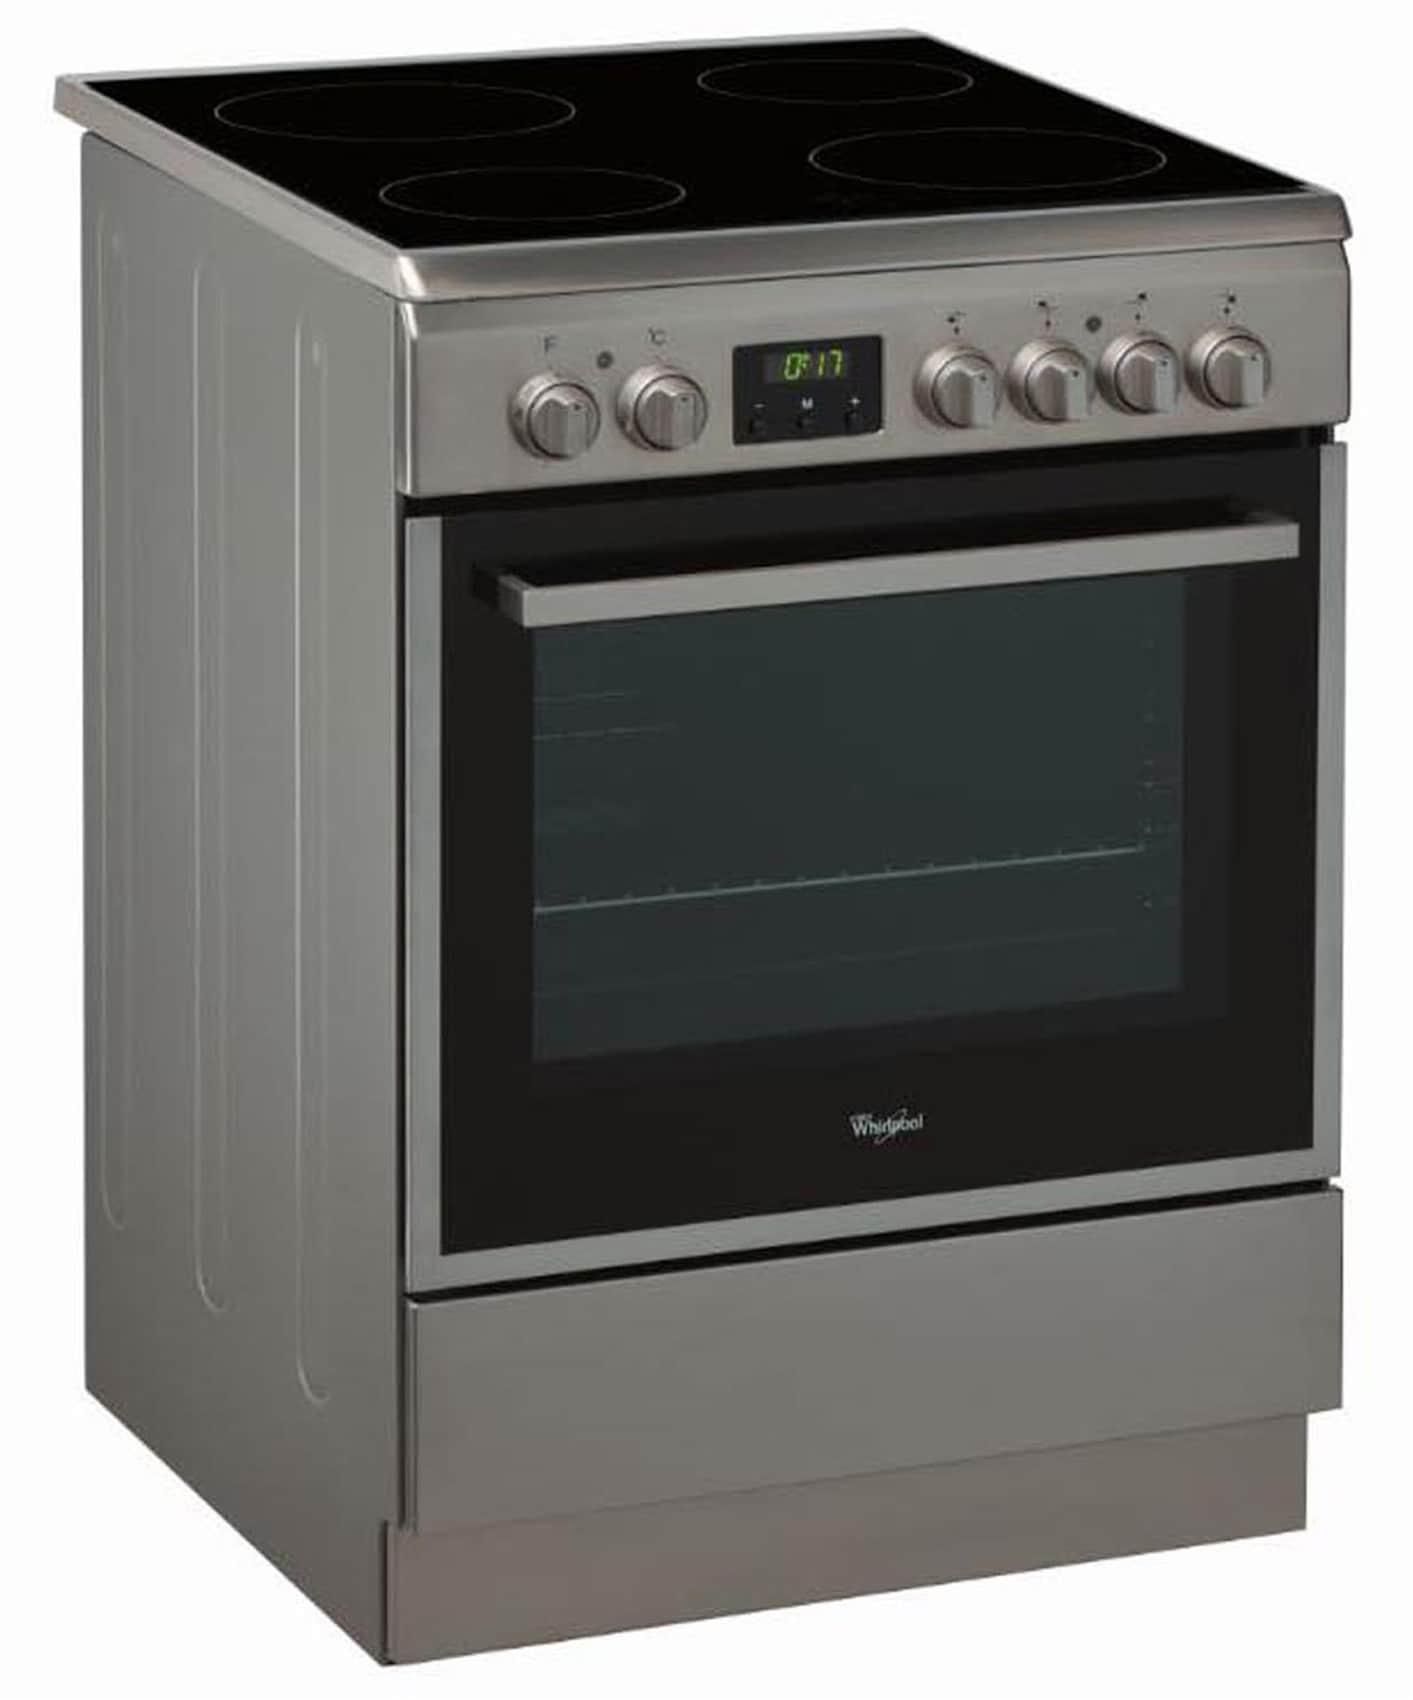 Whirlpool Free Standing Ceramic 60X60 Cm Cooker With  4 Cooking Zones Stainless Steel  ACMT 65